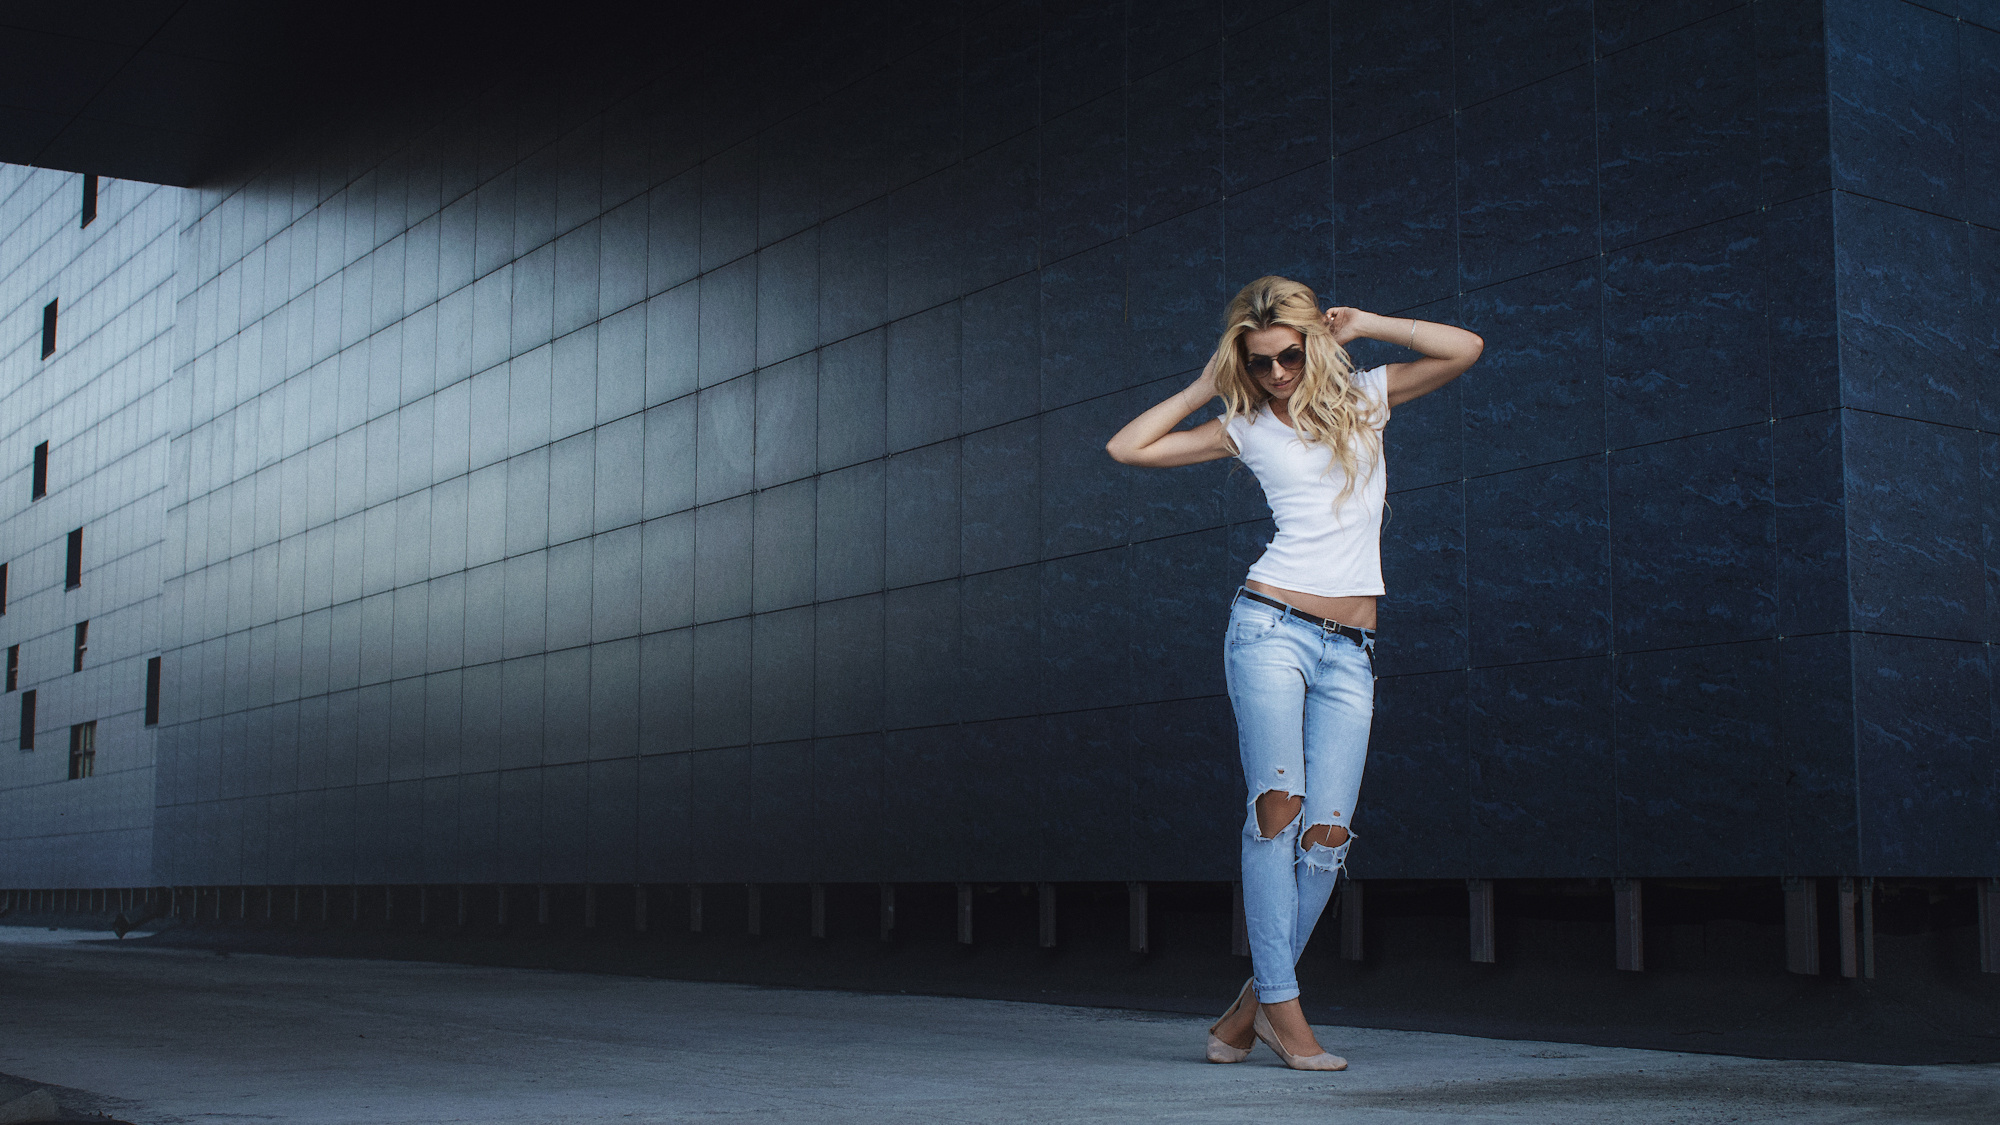 People 2000x1125 Ivan Kopchenov model women blonde sunglasses women with shades T-shirt jeans torn jeans hand(s) in hair